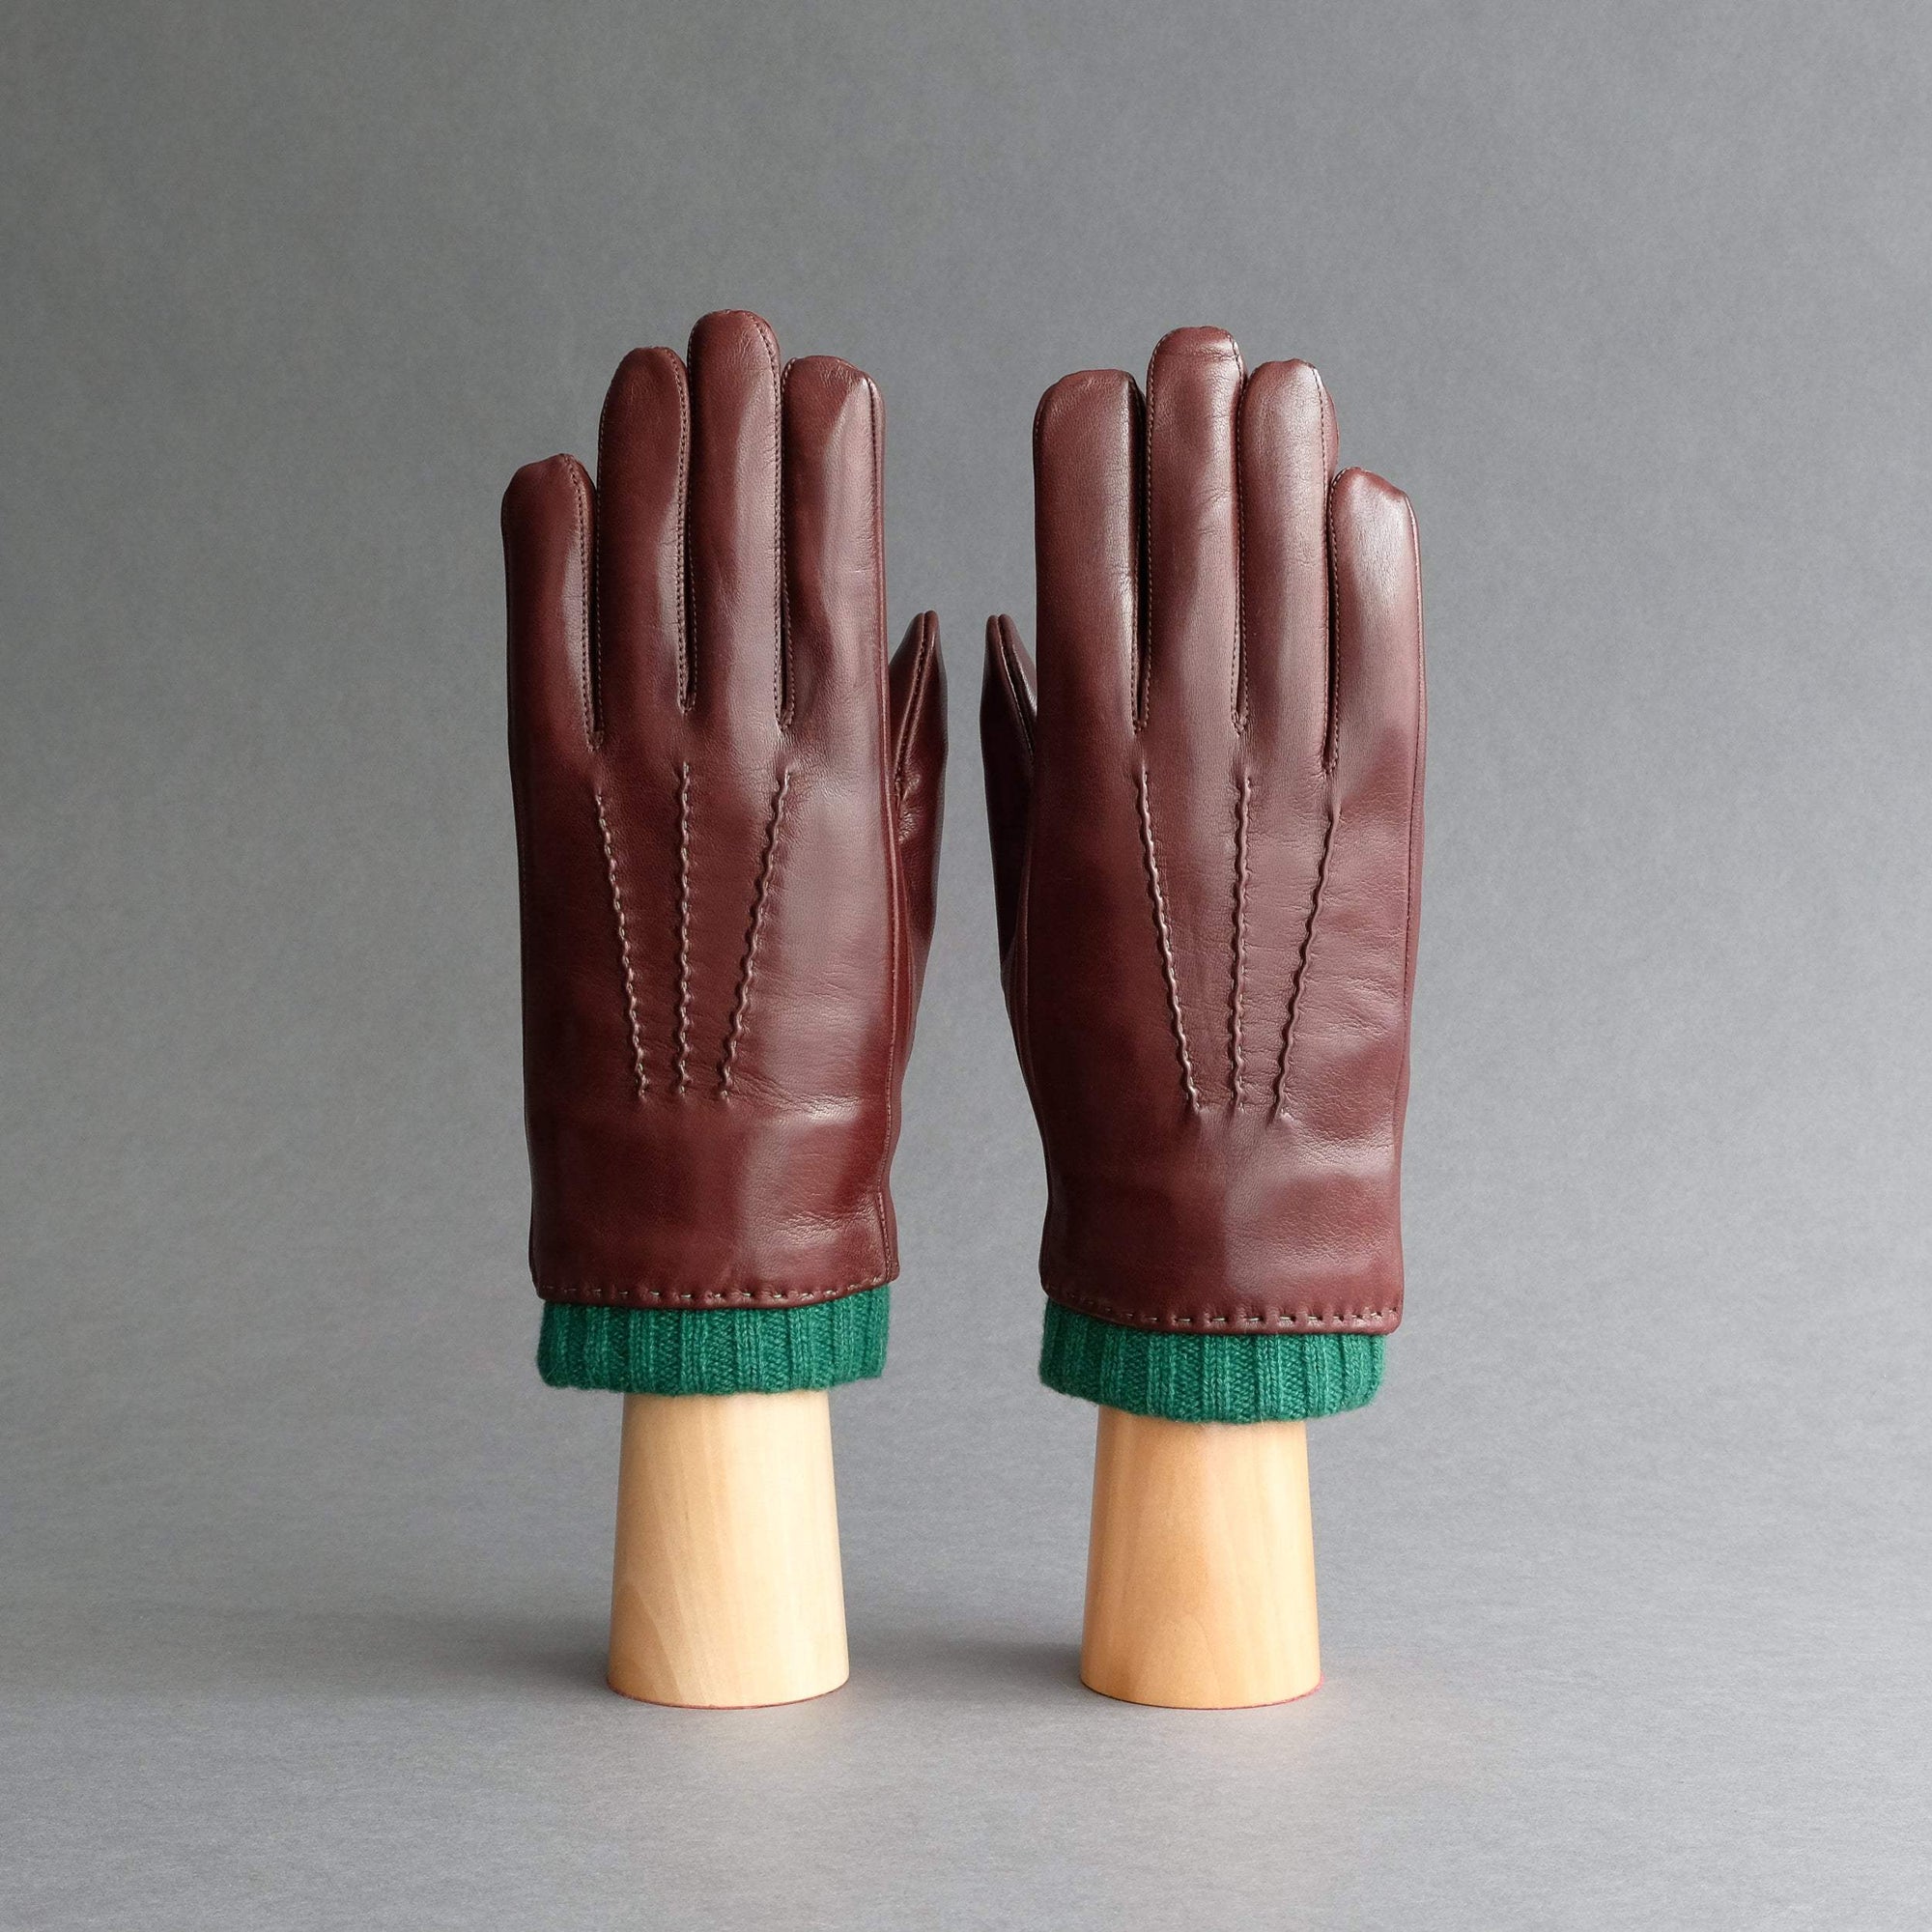 Gentlemen's Gloves from Brown/Tan Hair Sheep Nappa Lined With Cashmere - TR Handschuhe Wien - Thomas Riemer Handmade Gloves